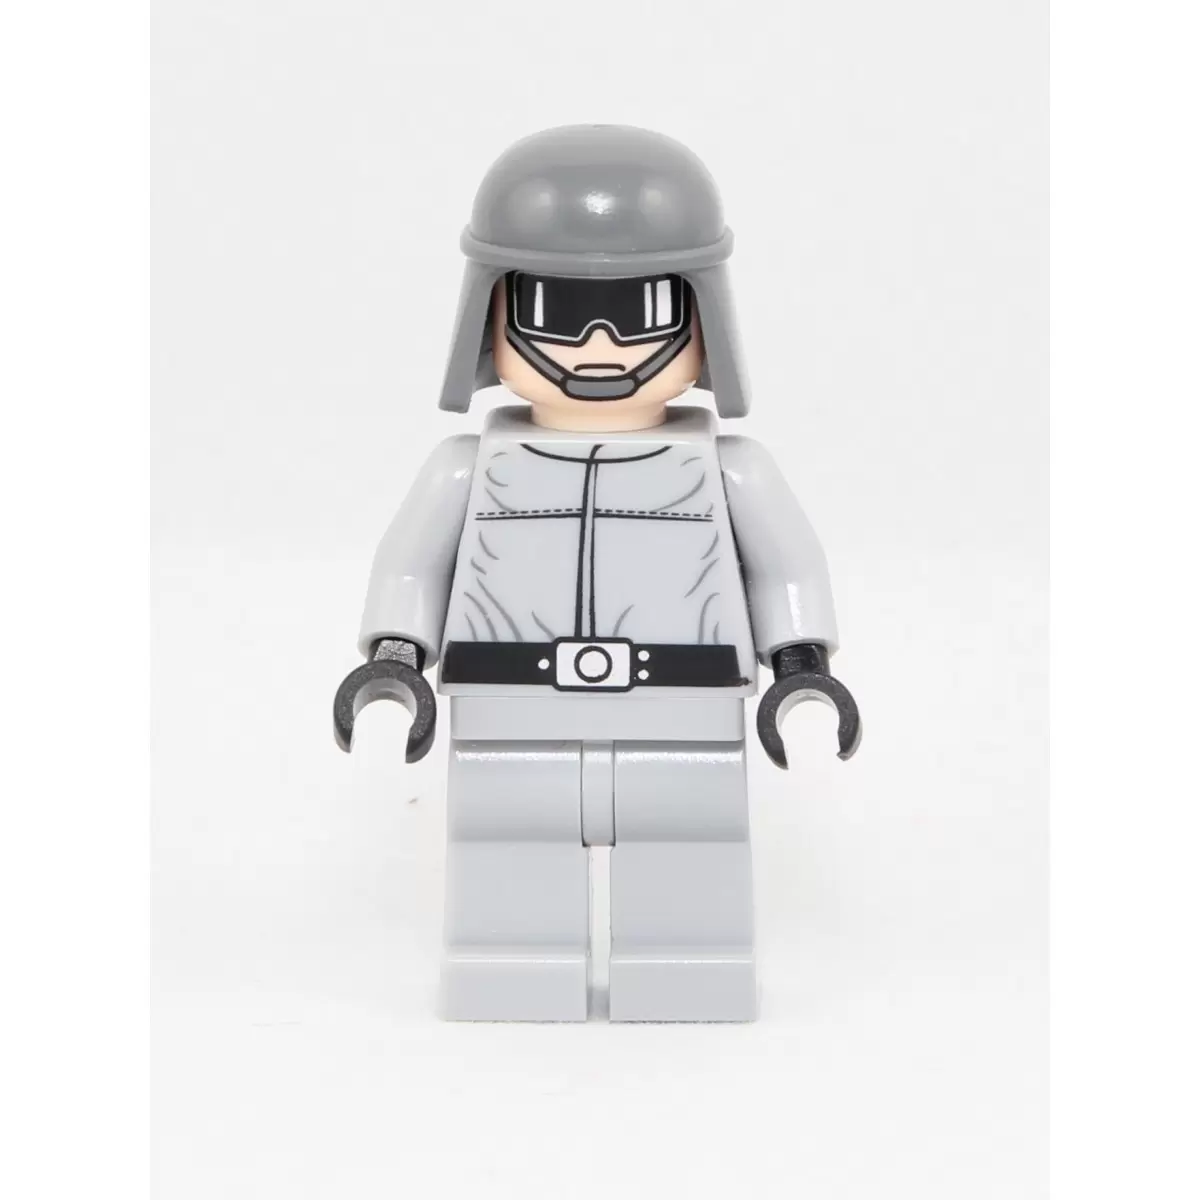 Minifigurines LEGO Star Wars - Imperial AT-ST Pilot